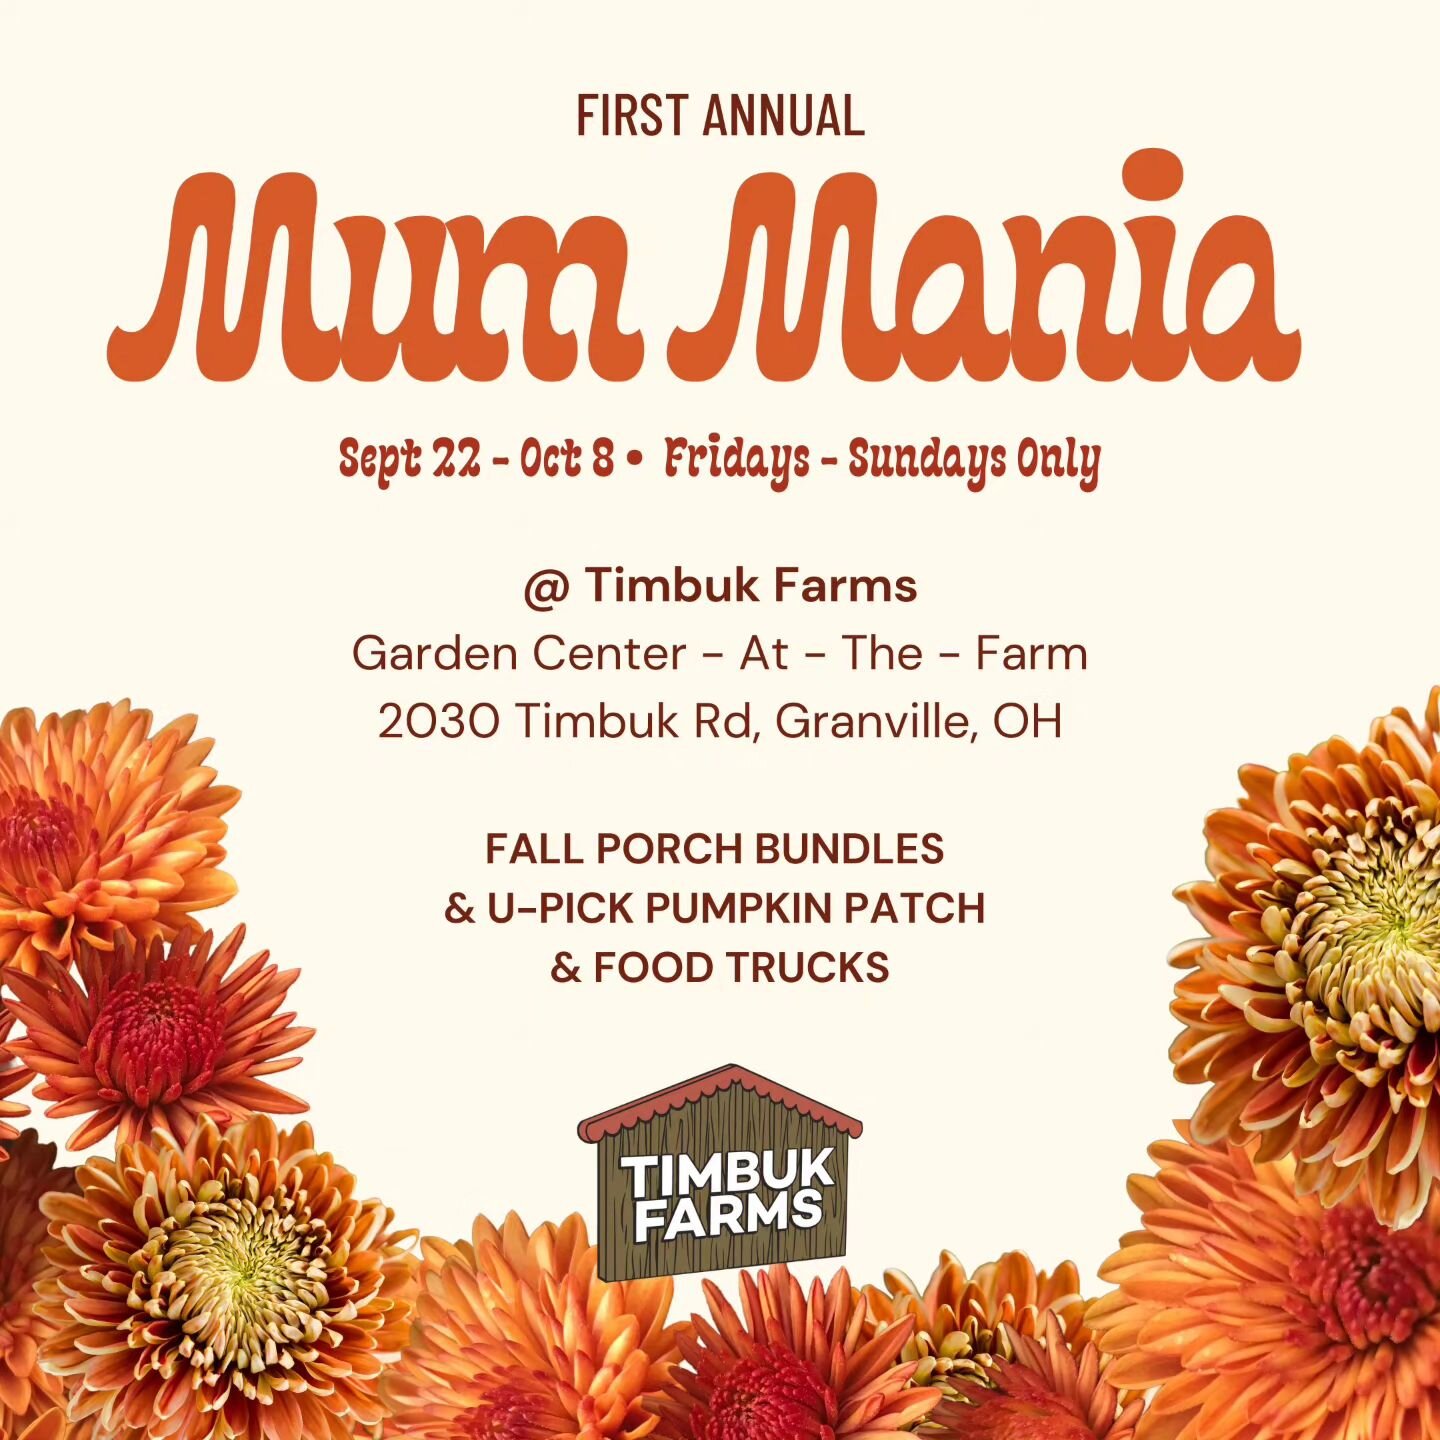 Stop on by for our first ever Mum Mania! 🌼 🍂🌼 We have healthy, beautiful mums grown right here, a pumpkin patch, a food truck, and more autumn goodies!

FALL PORCH BUNDLES 
- Save up to 40% on autumn porch decor, including mums, annuals, corn stal